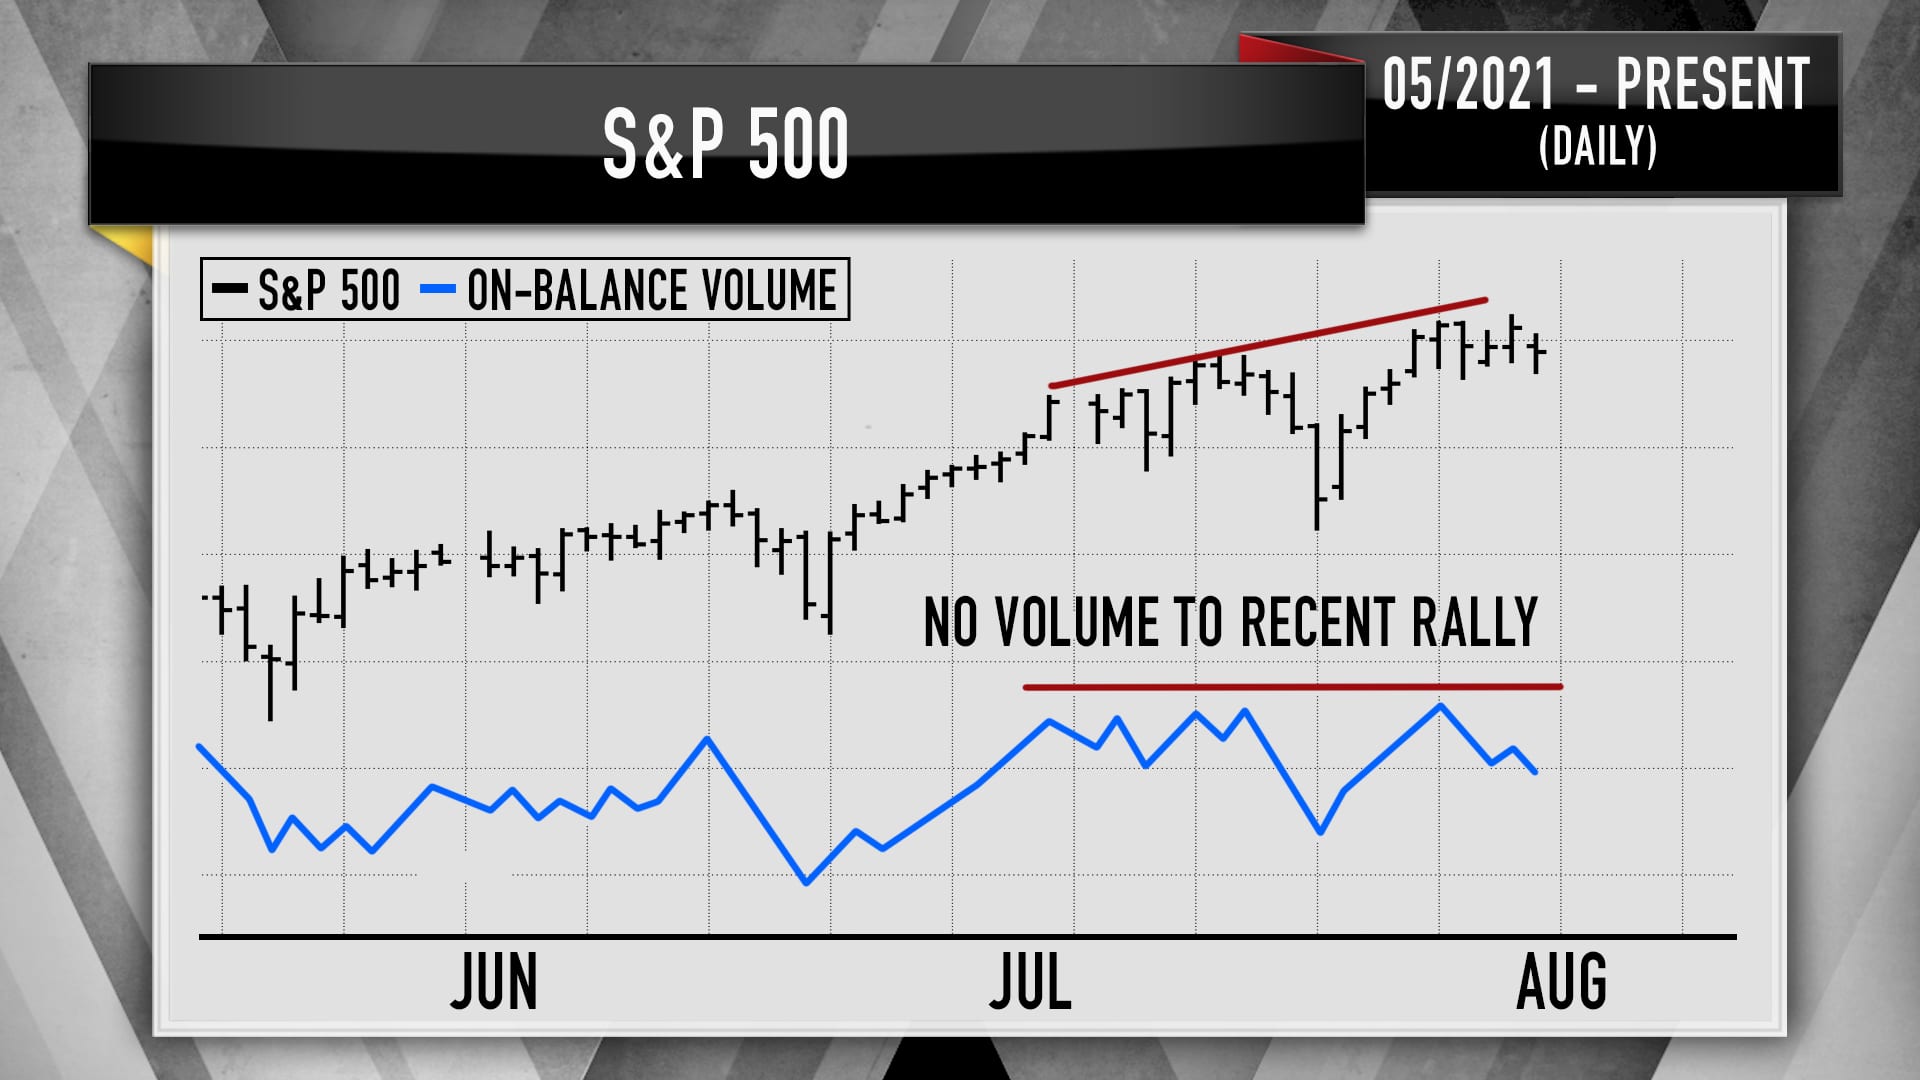 Recent on-balance volume for the S&P 500, based on technical analysis from Larry Williams.